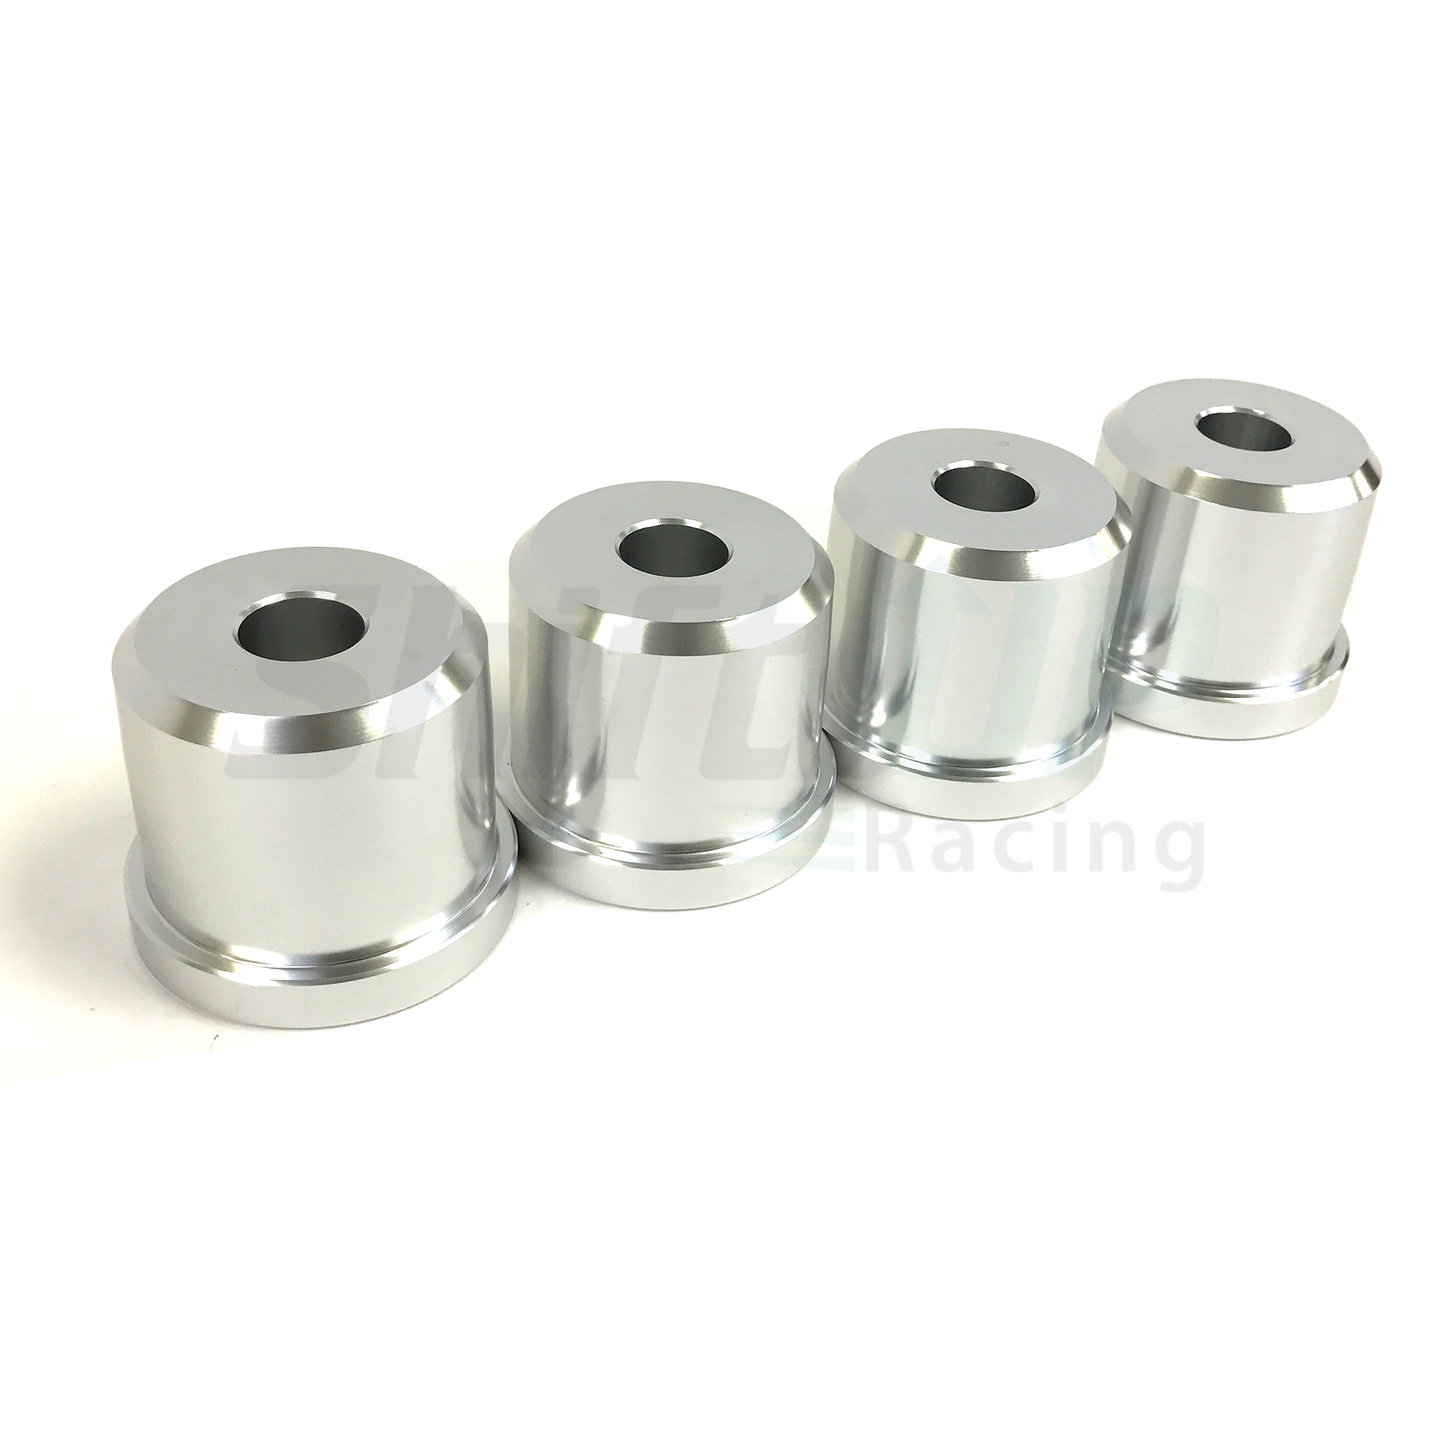 Precision Works Solid Aluminum Subframe Bushings - Nissan 240SX - Shift Up Racing